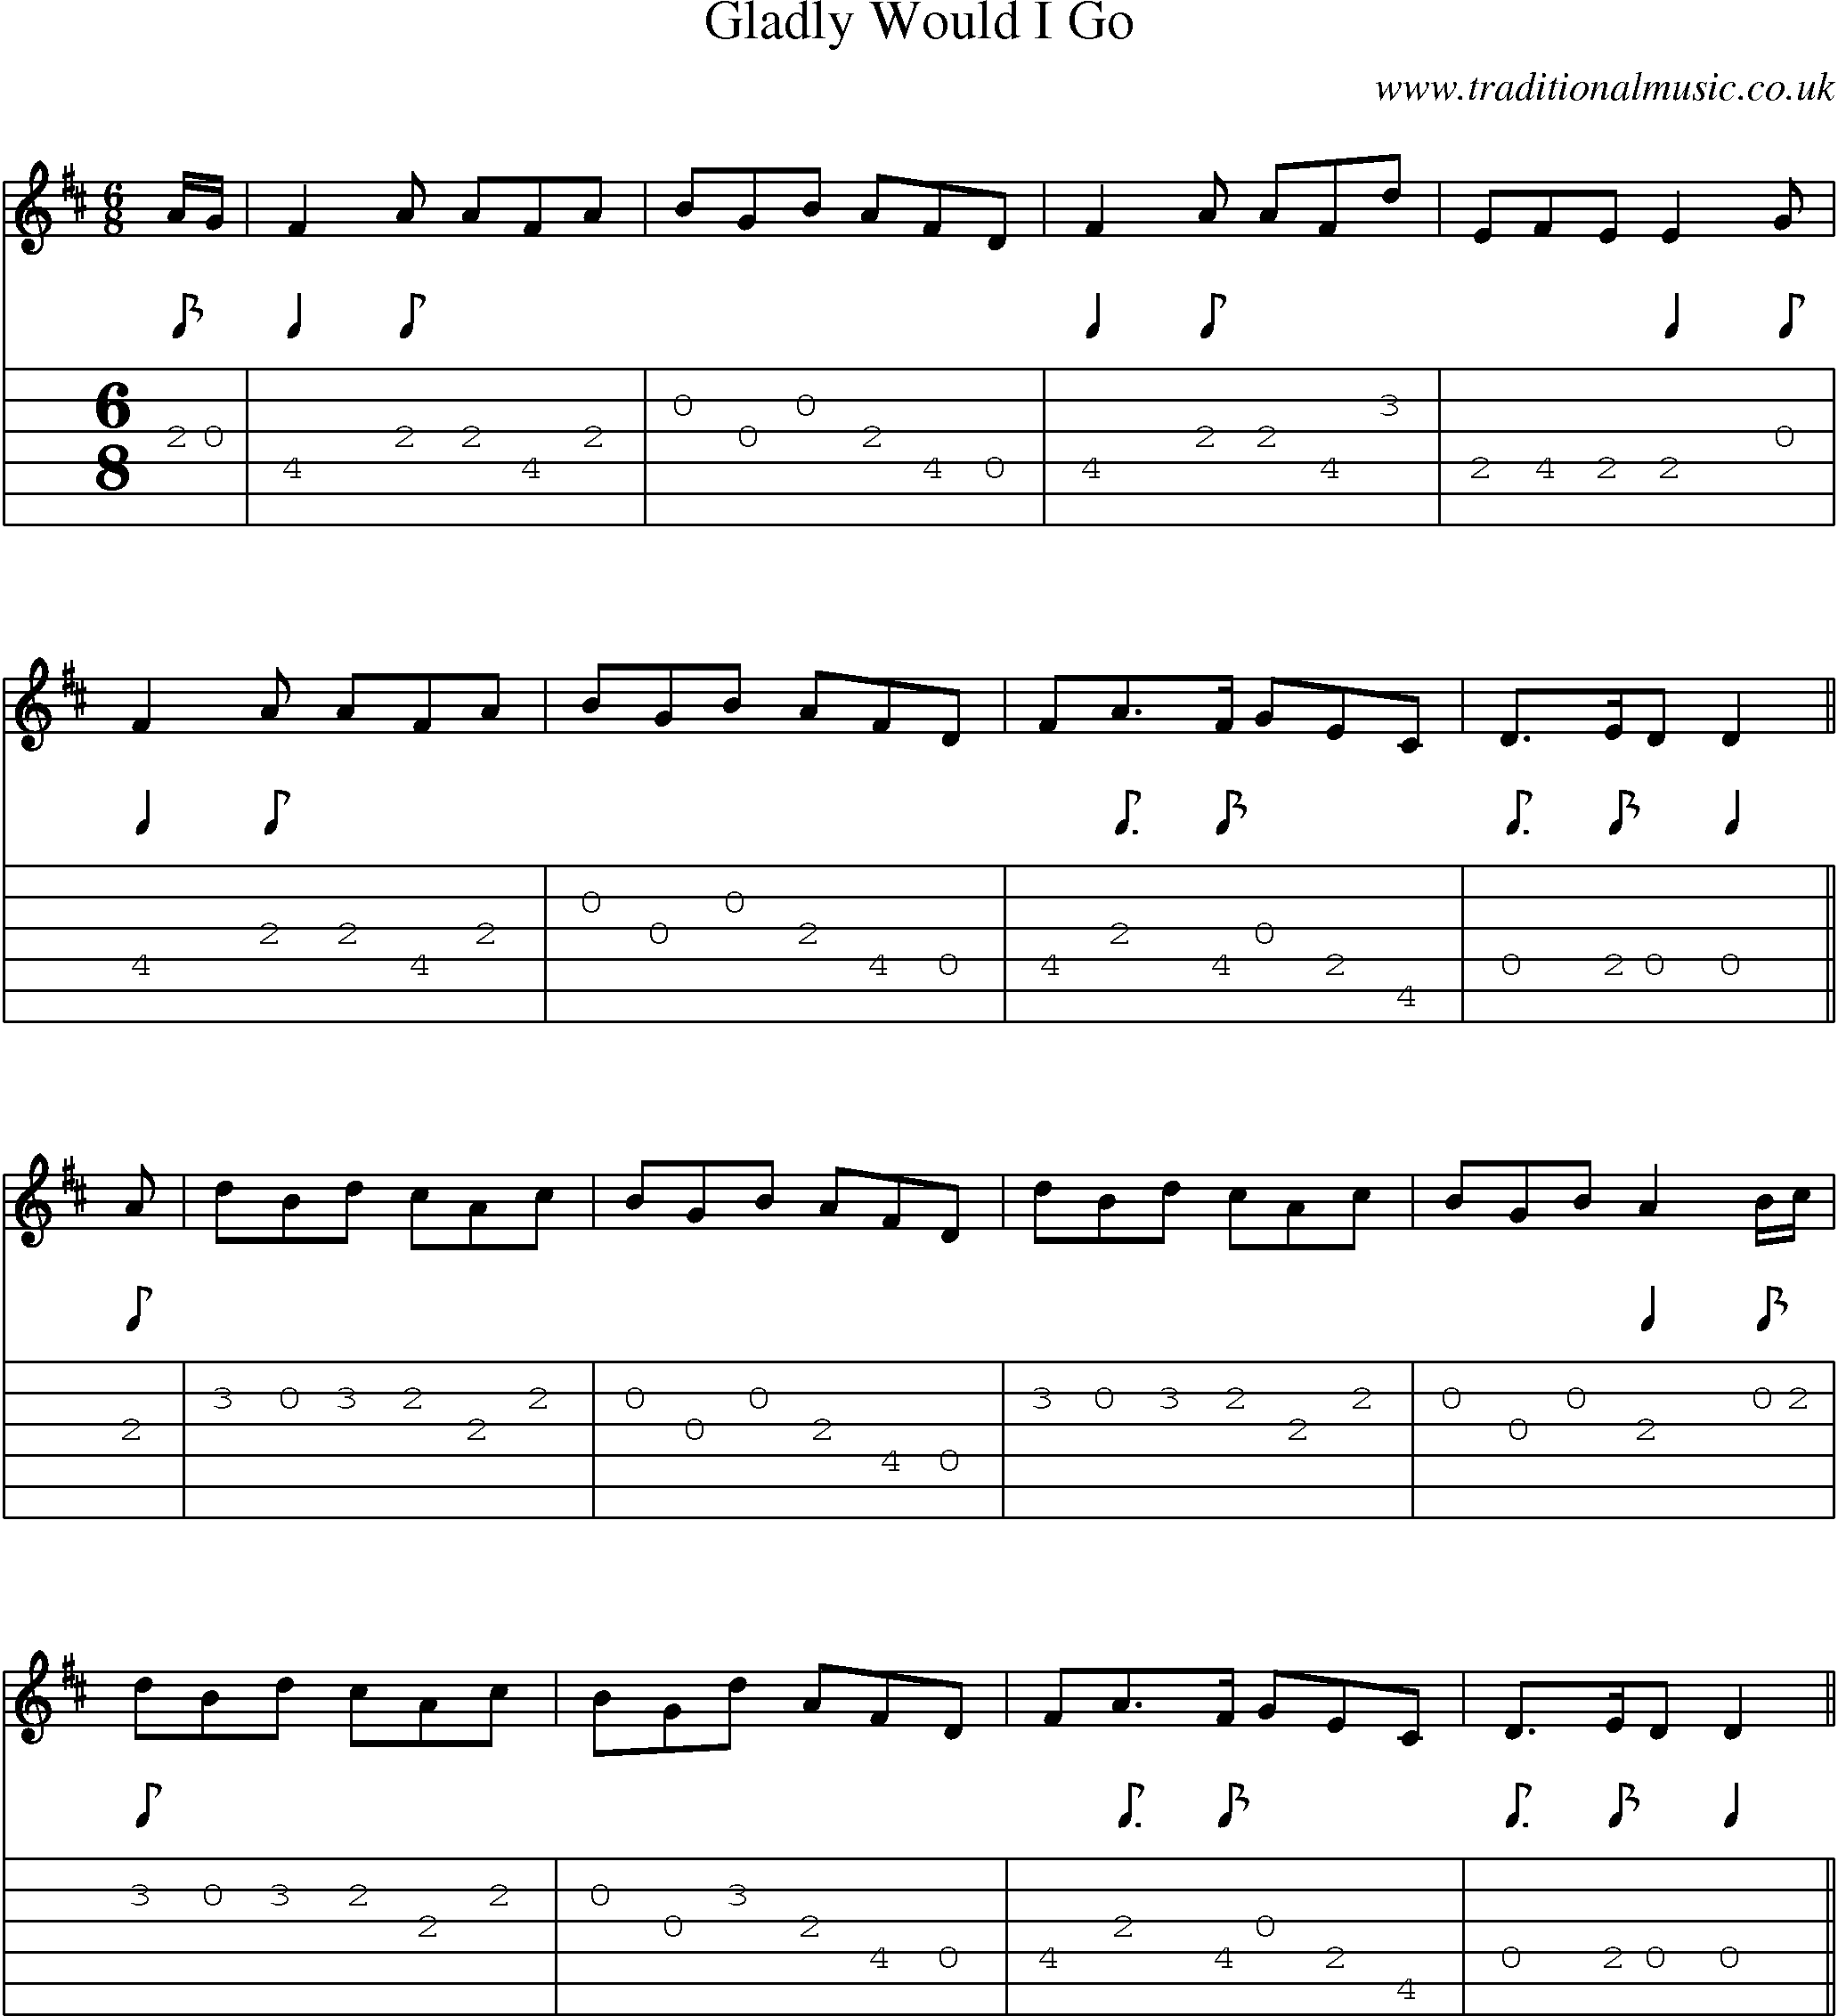 Music Score and Guitar Tabs for Gladly Would I Go